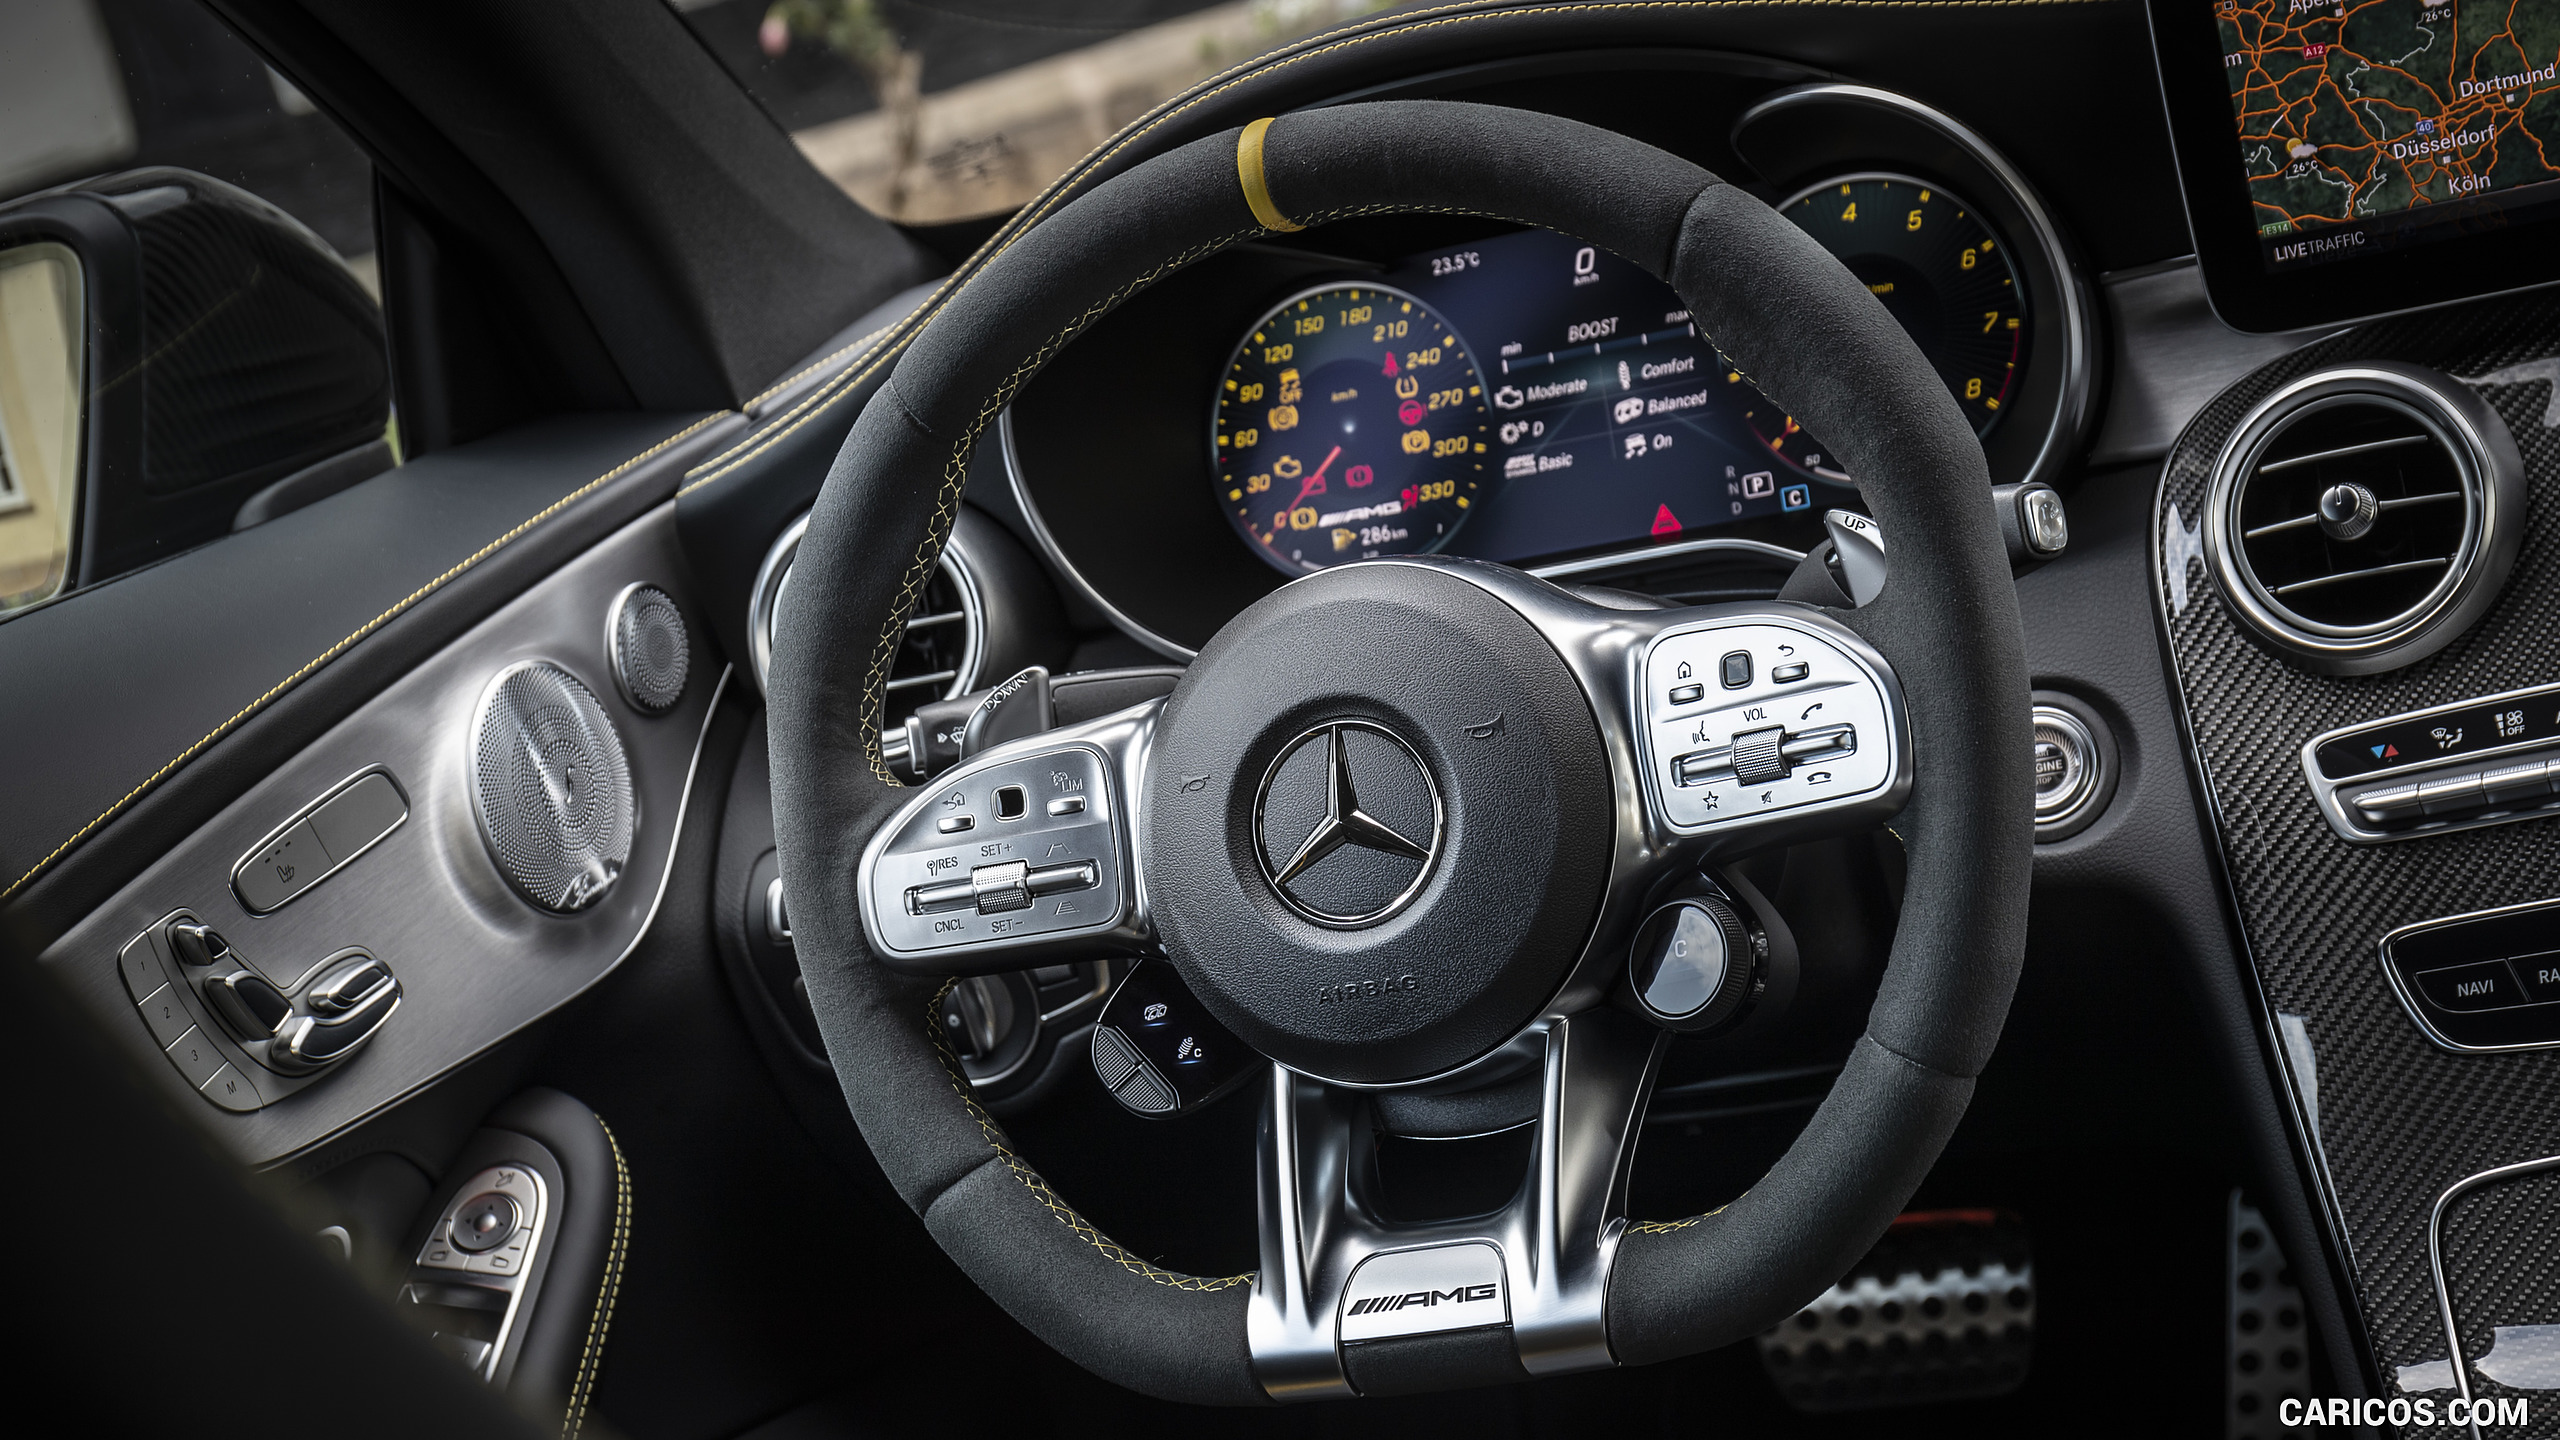 2019 Mercedes-AMG C 63 S Coupe - Interior, #93 of 106